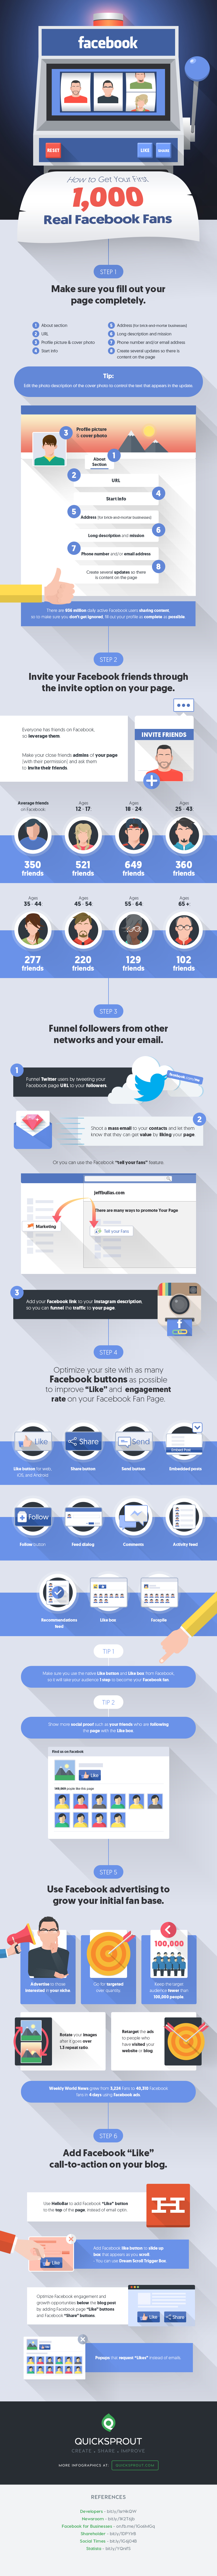 Facebook page likes infographics